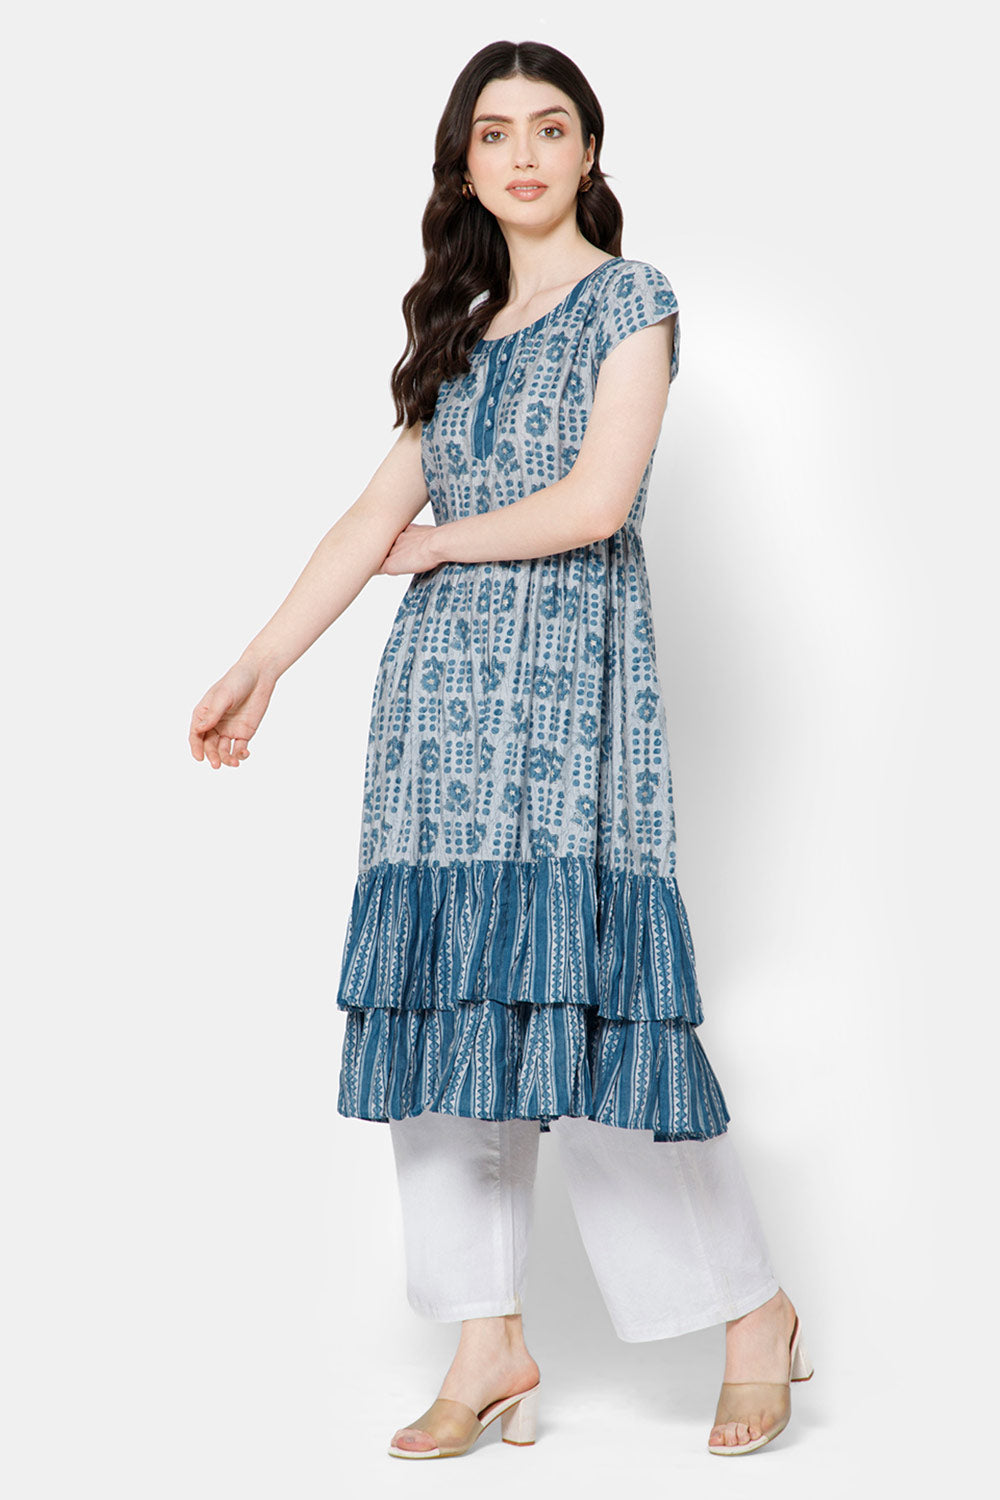 Mythri Women's Fit and Flare Casual Dress - Blue - DR04